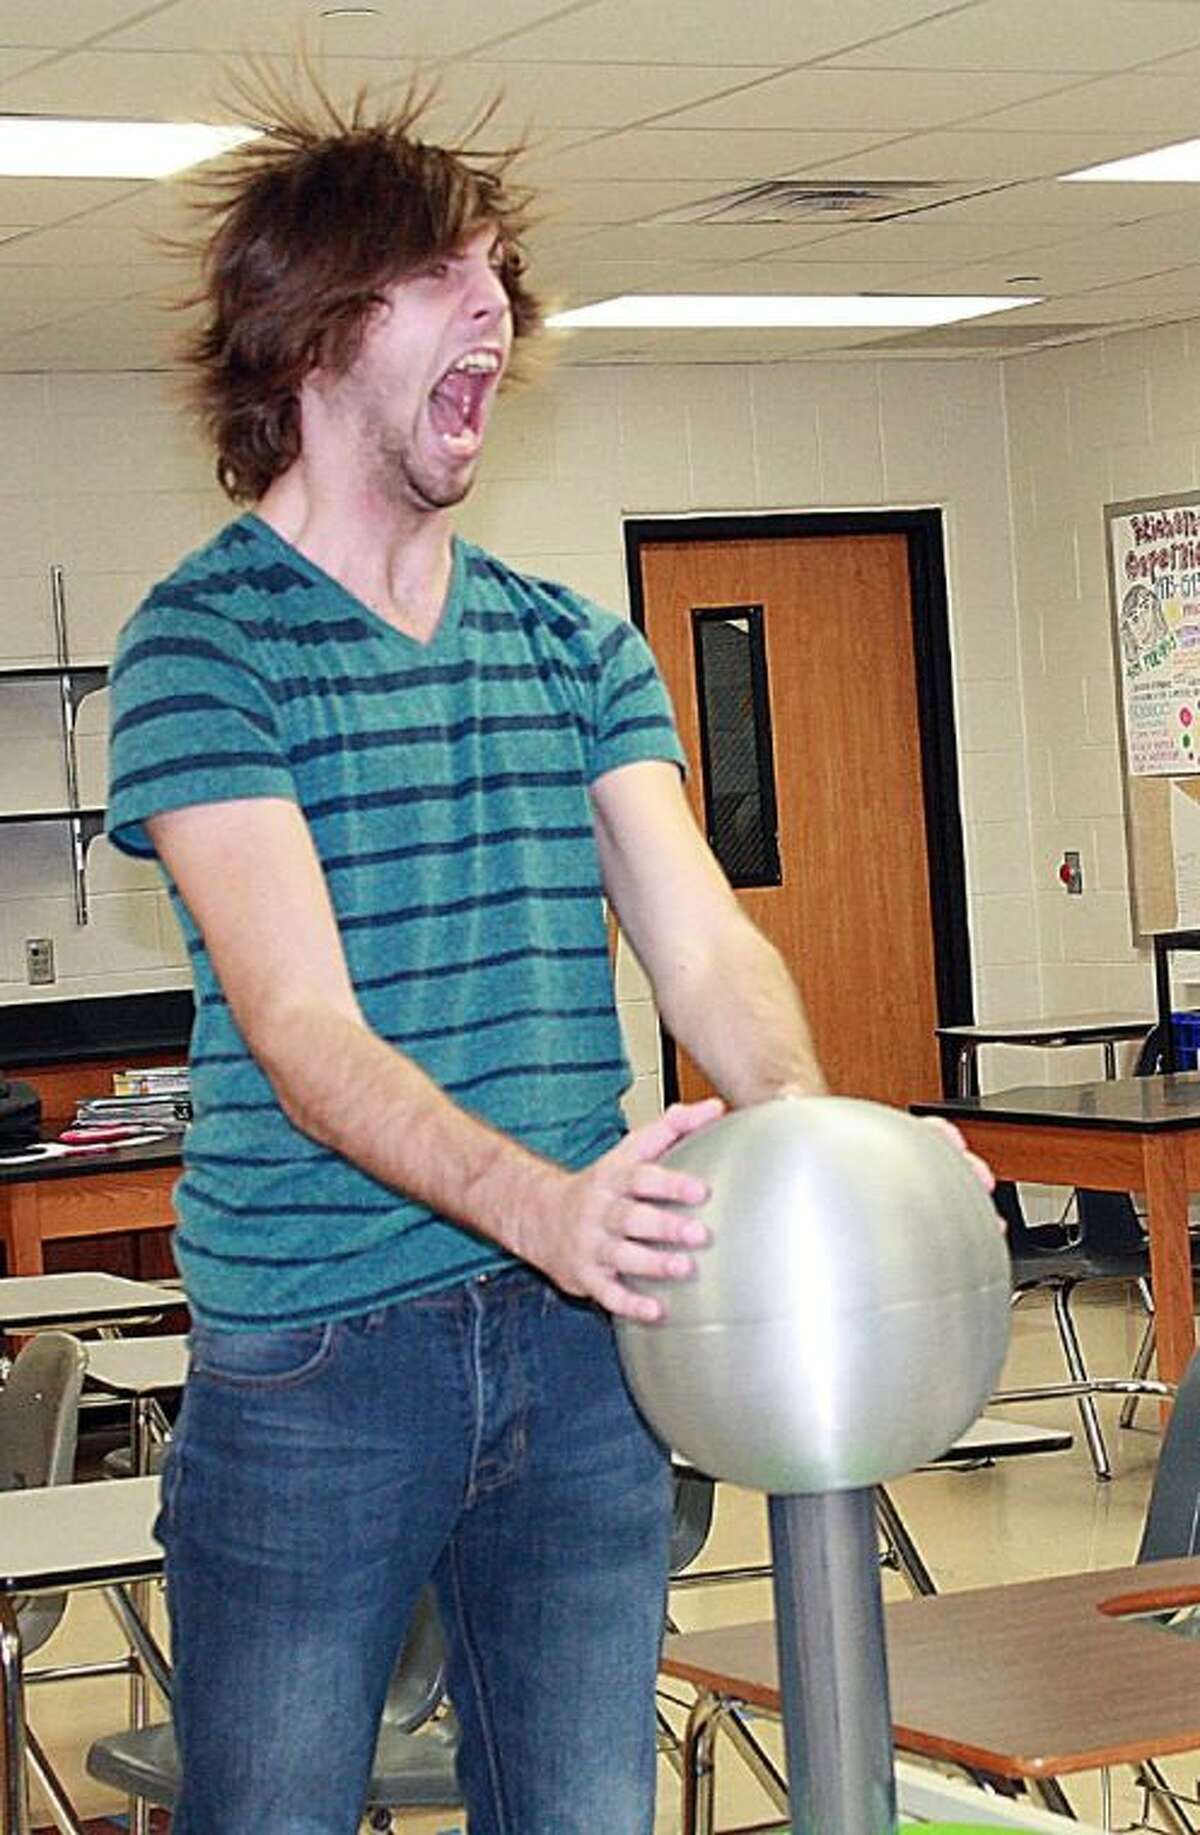 Jersey Village sophomore Jeleny Solorzano placed third in the Yearbook Academic Photo category of the NFPW High School Writing Contest for his photo. The original cutline reads, “Taking his turn in the physics lab, Dylan Golvach, senior, places his hands on the electromagnetic ball and lets out a scream in agony as he gets a quick shock.”